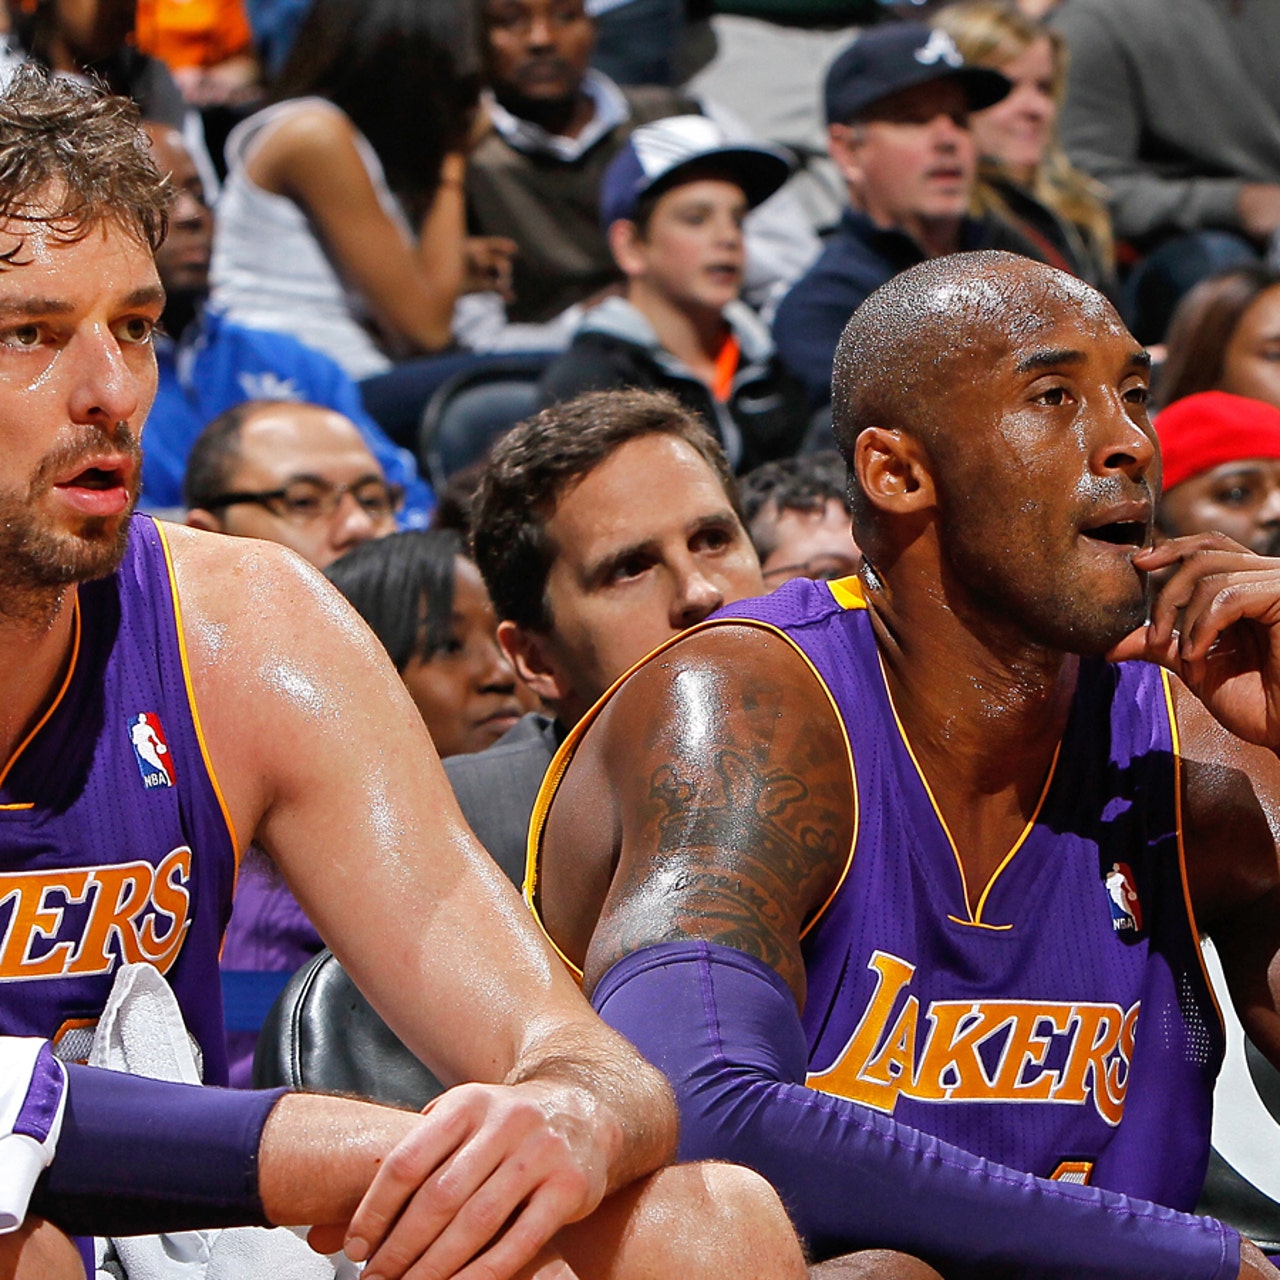 Pau Gasol Says Teaming With Kobe Bryant For Barcelona 'Is Funny